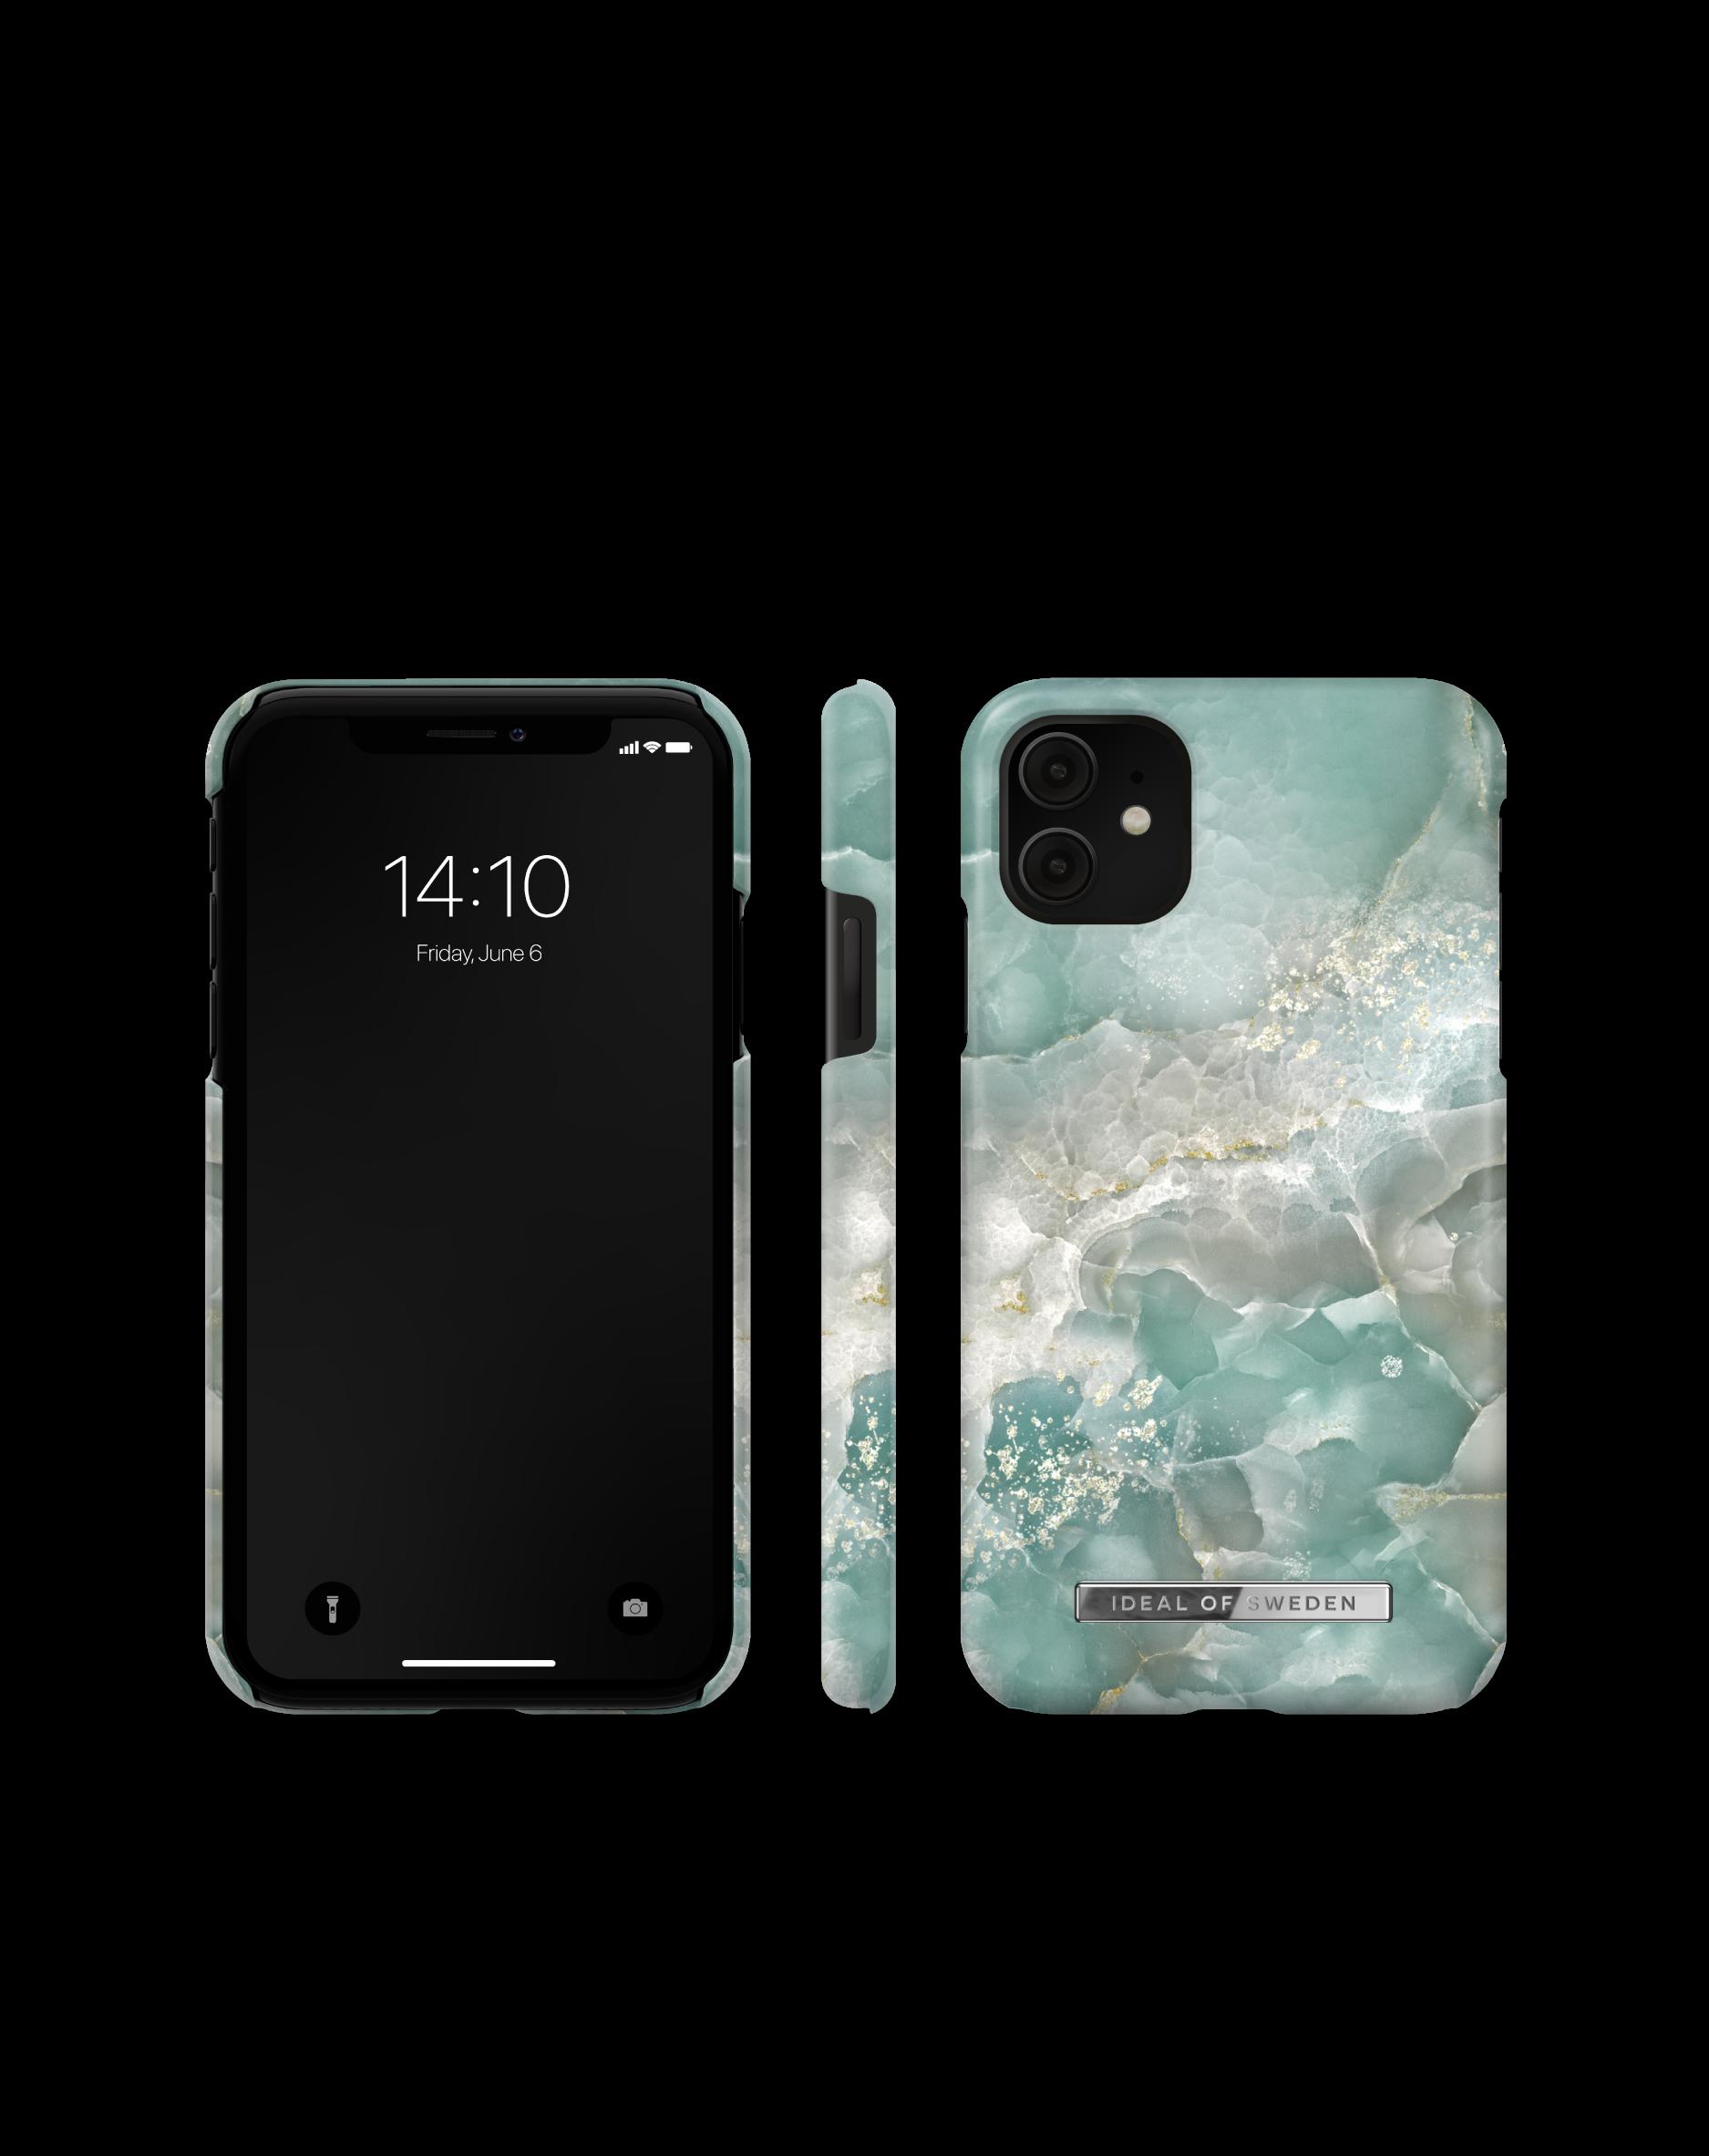 IDFCSS22-I1961-391, Apple, Backcover, / 11 iPhone Azura SWEDEN Marble OF IDEAL XR, iPhone